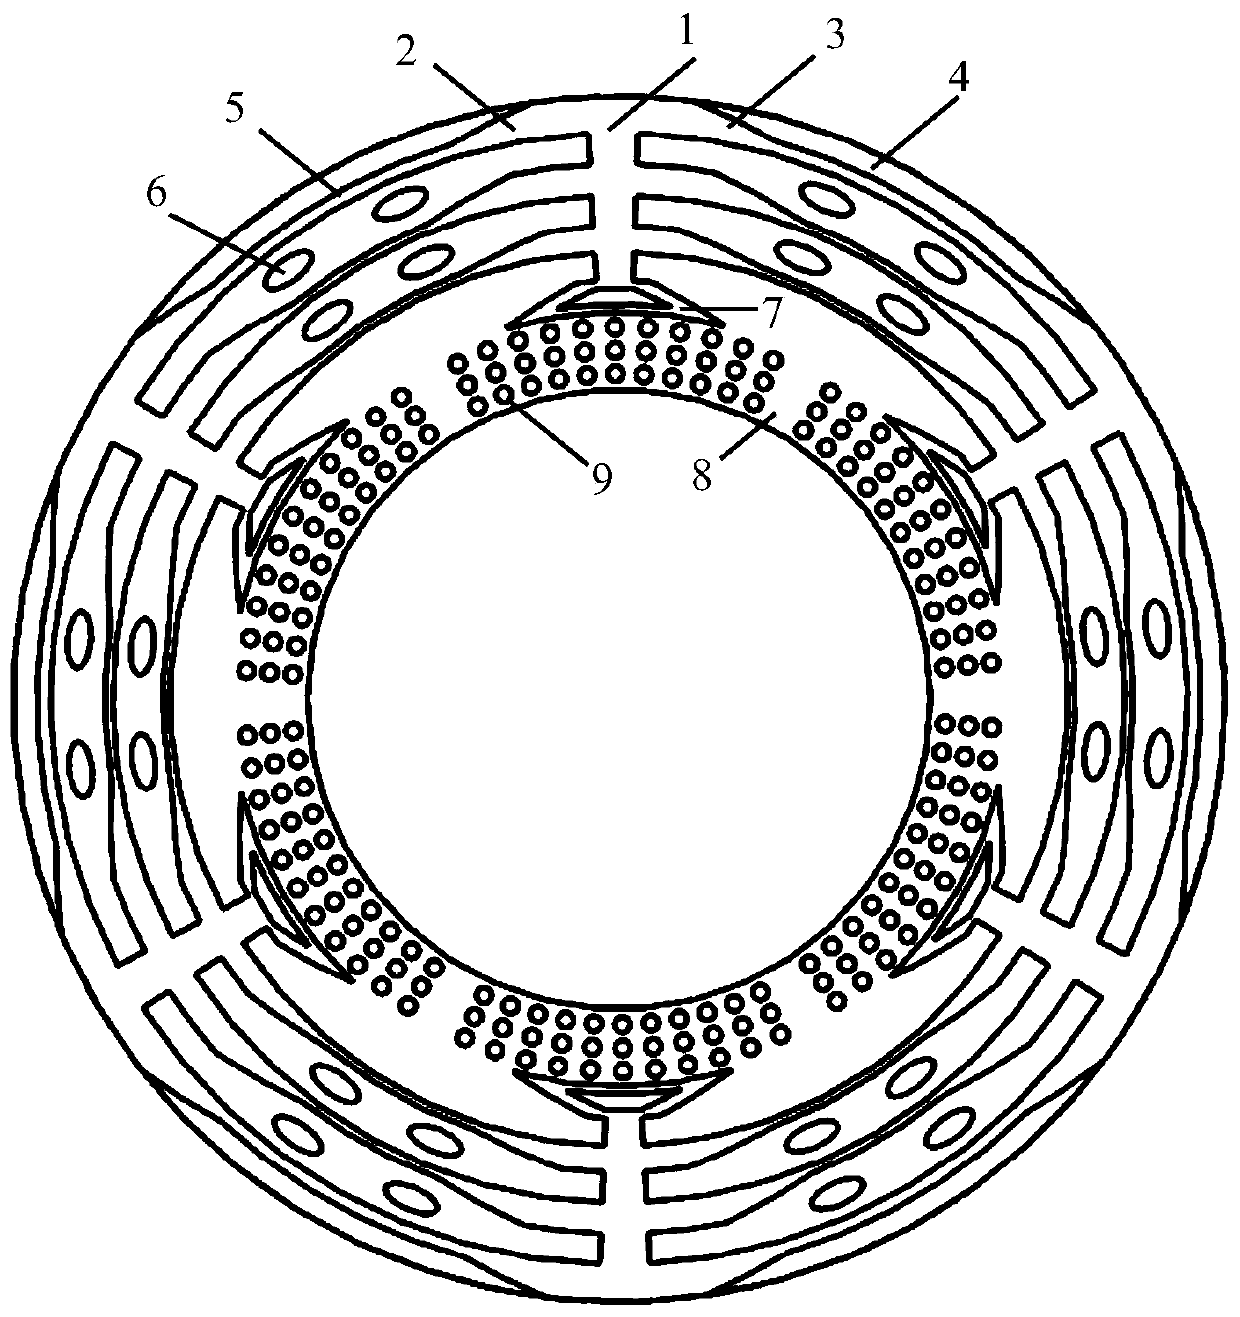 A fishbone-like dry gas seal structure